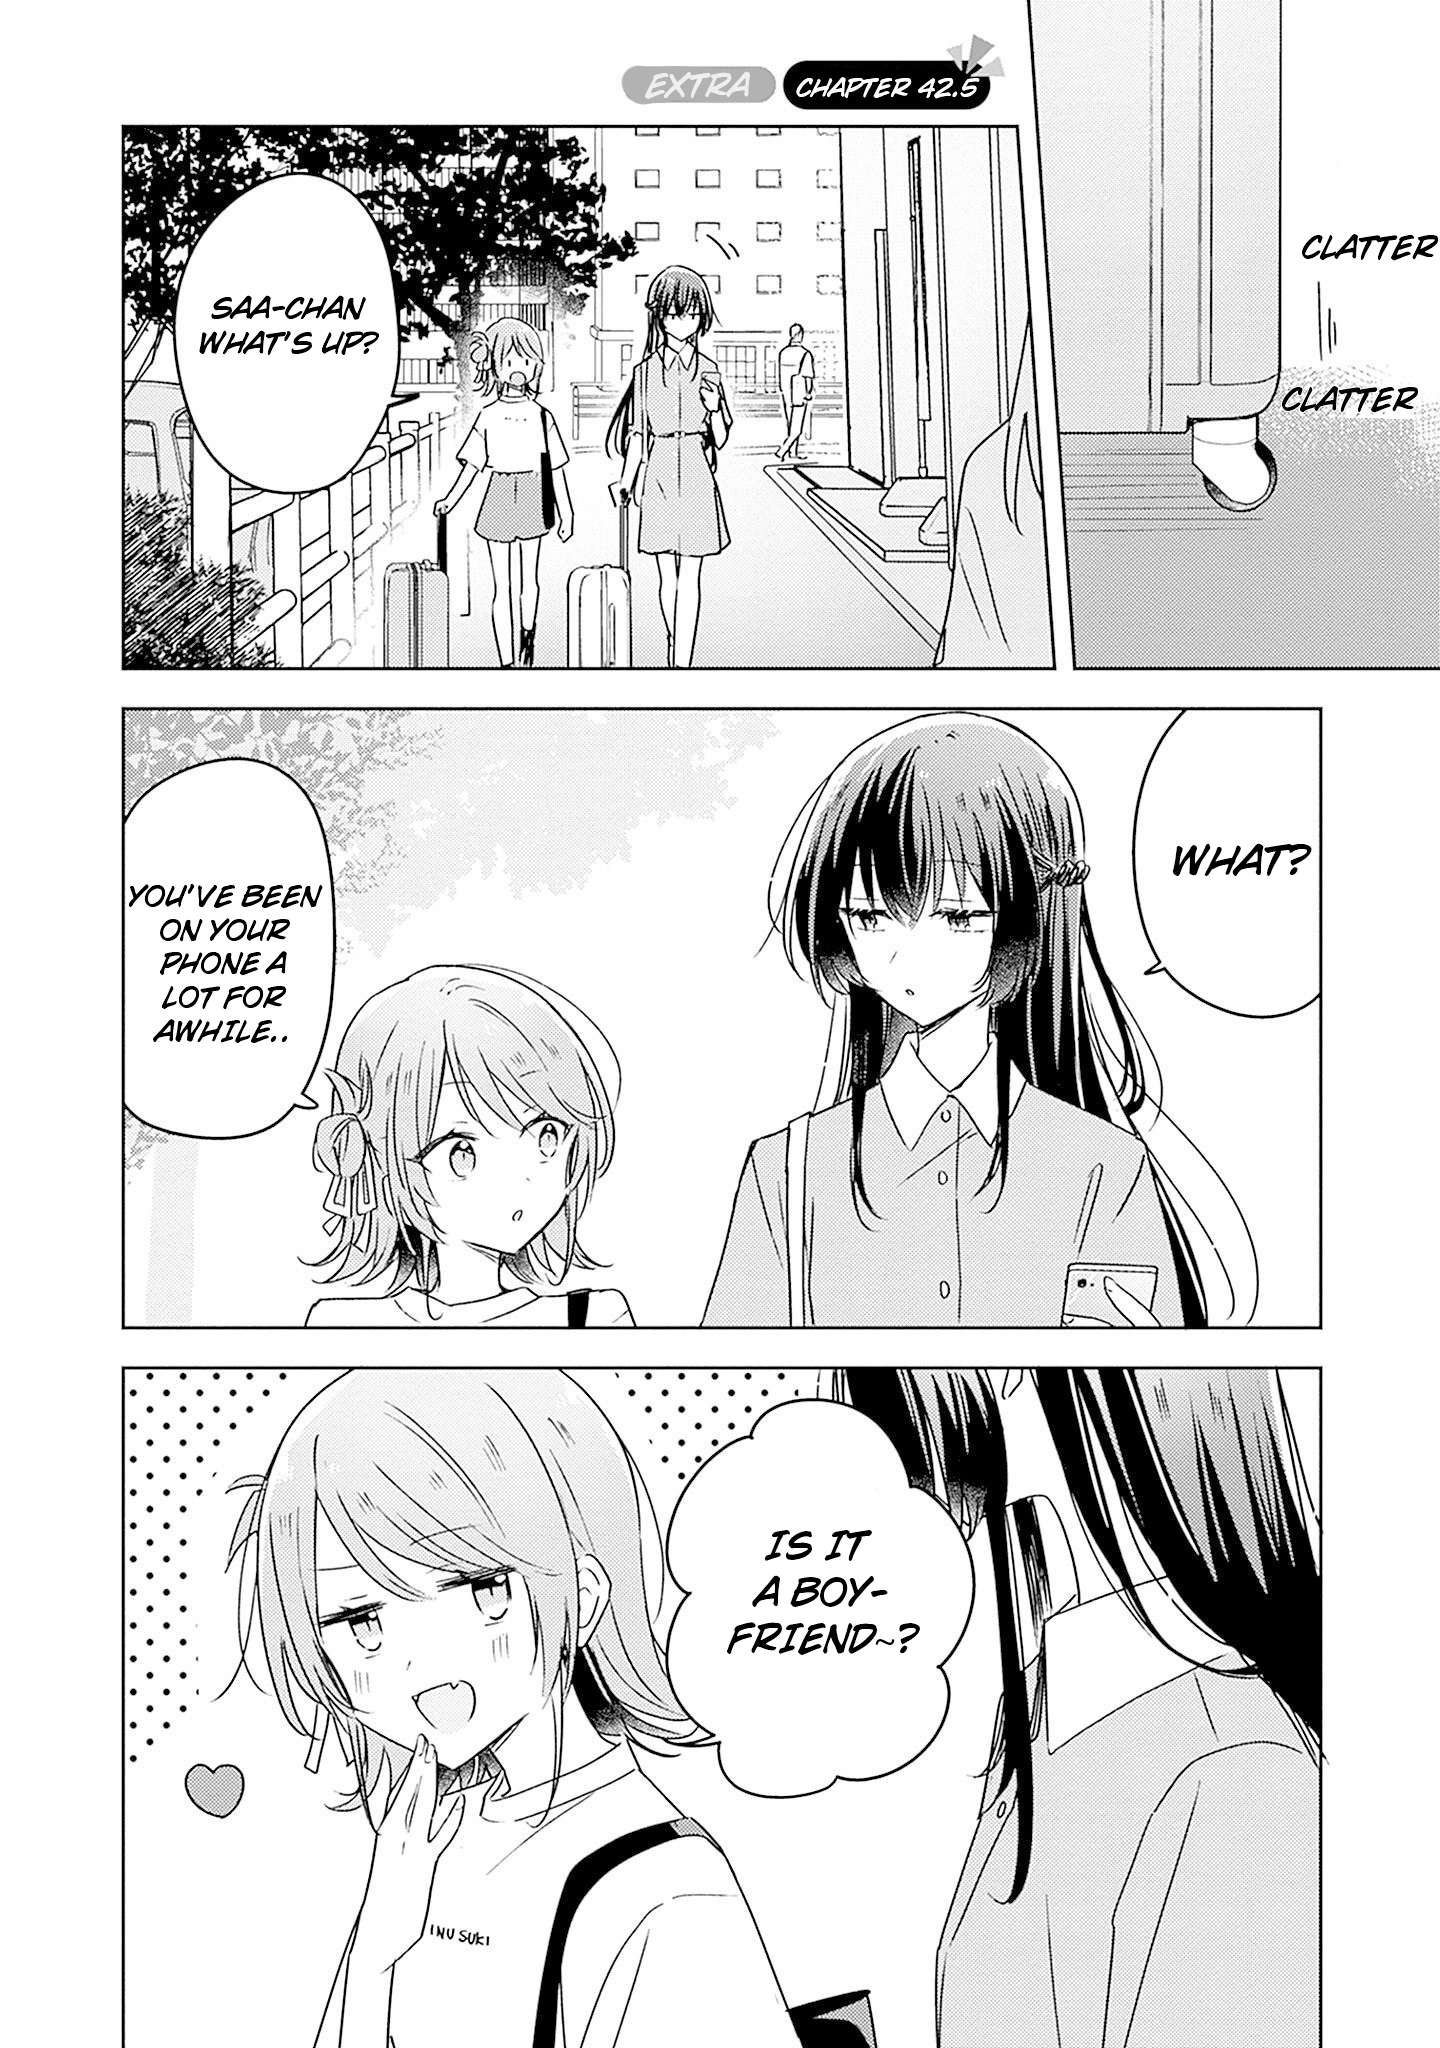 There's No Way I Can Have A Lover! *Or Maybe There Is? - chapter 44.5 - #1